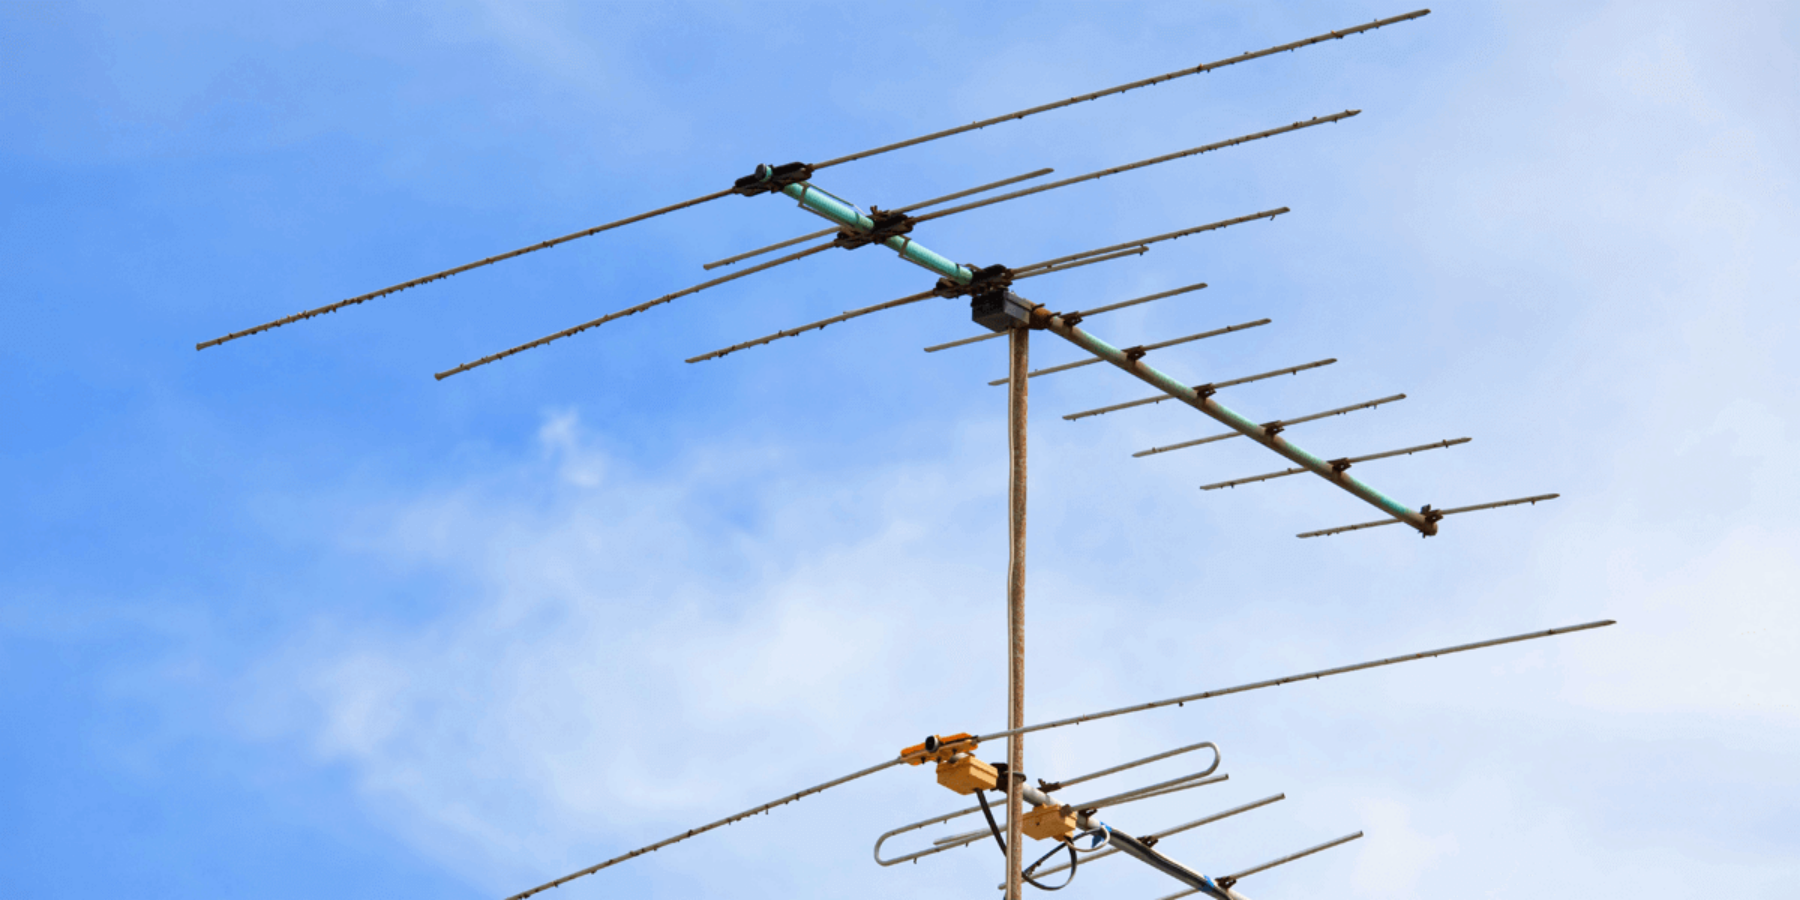 Which Antenna is Best? A Yagi Antenna or Omnidirectional?